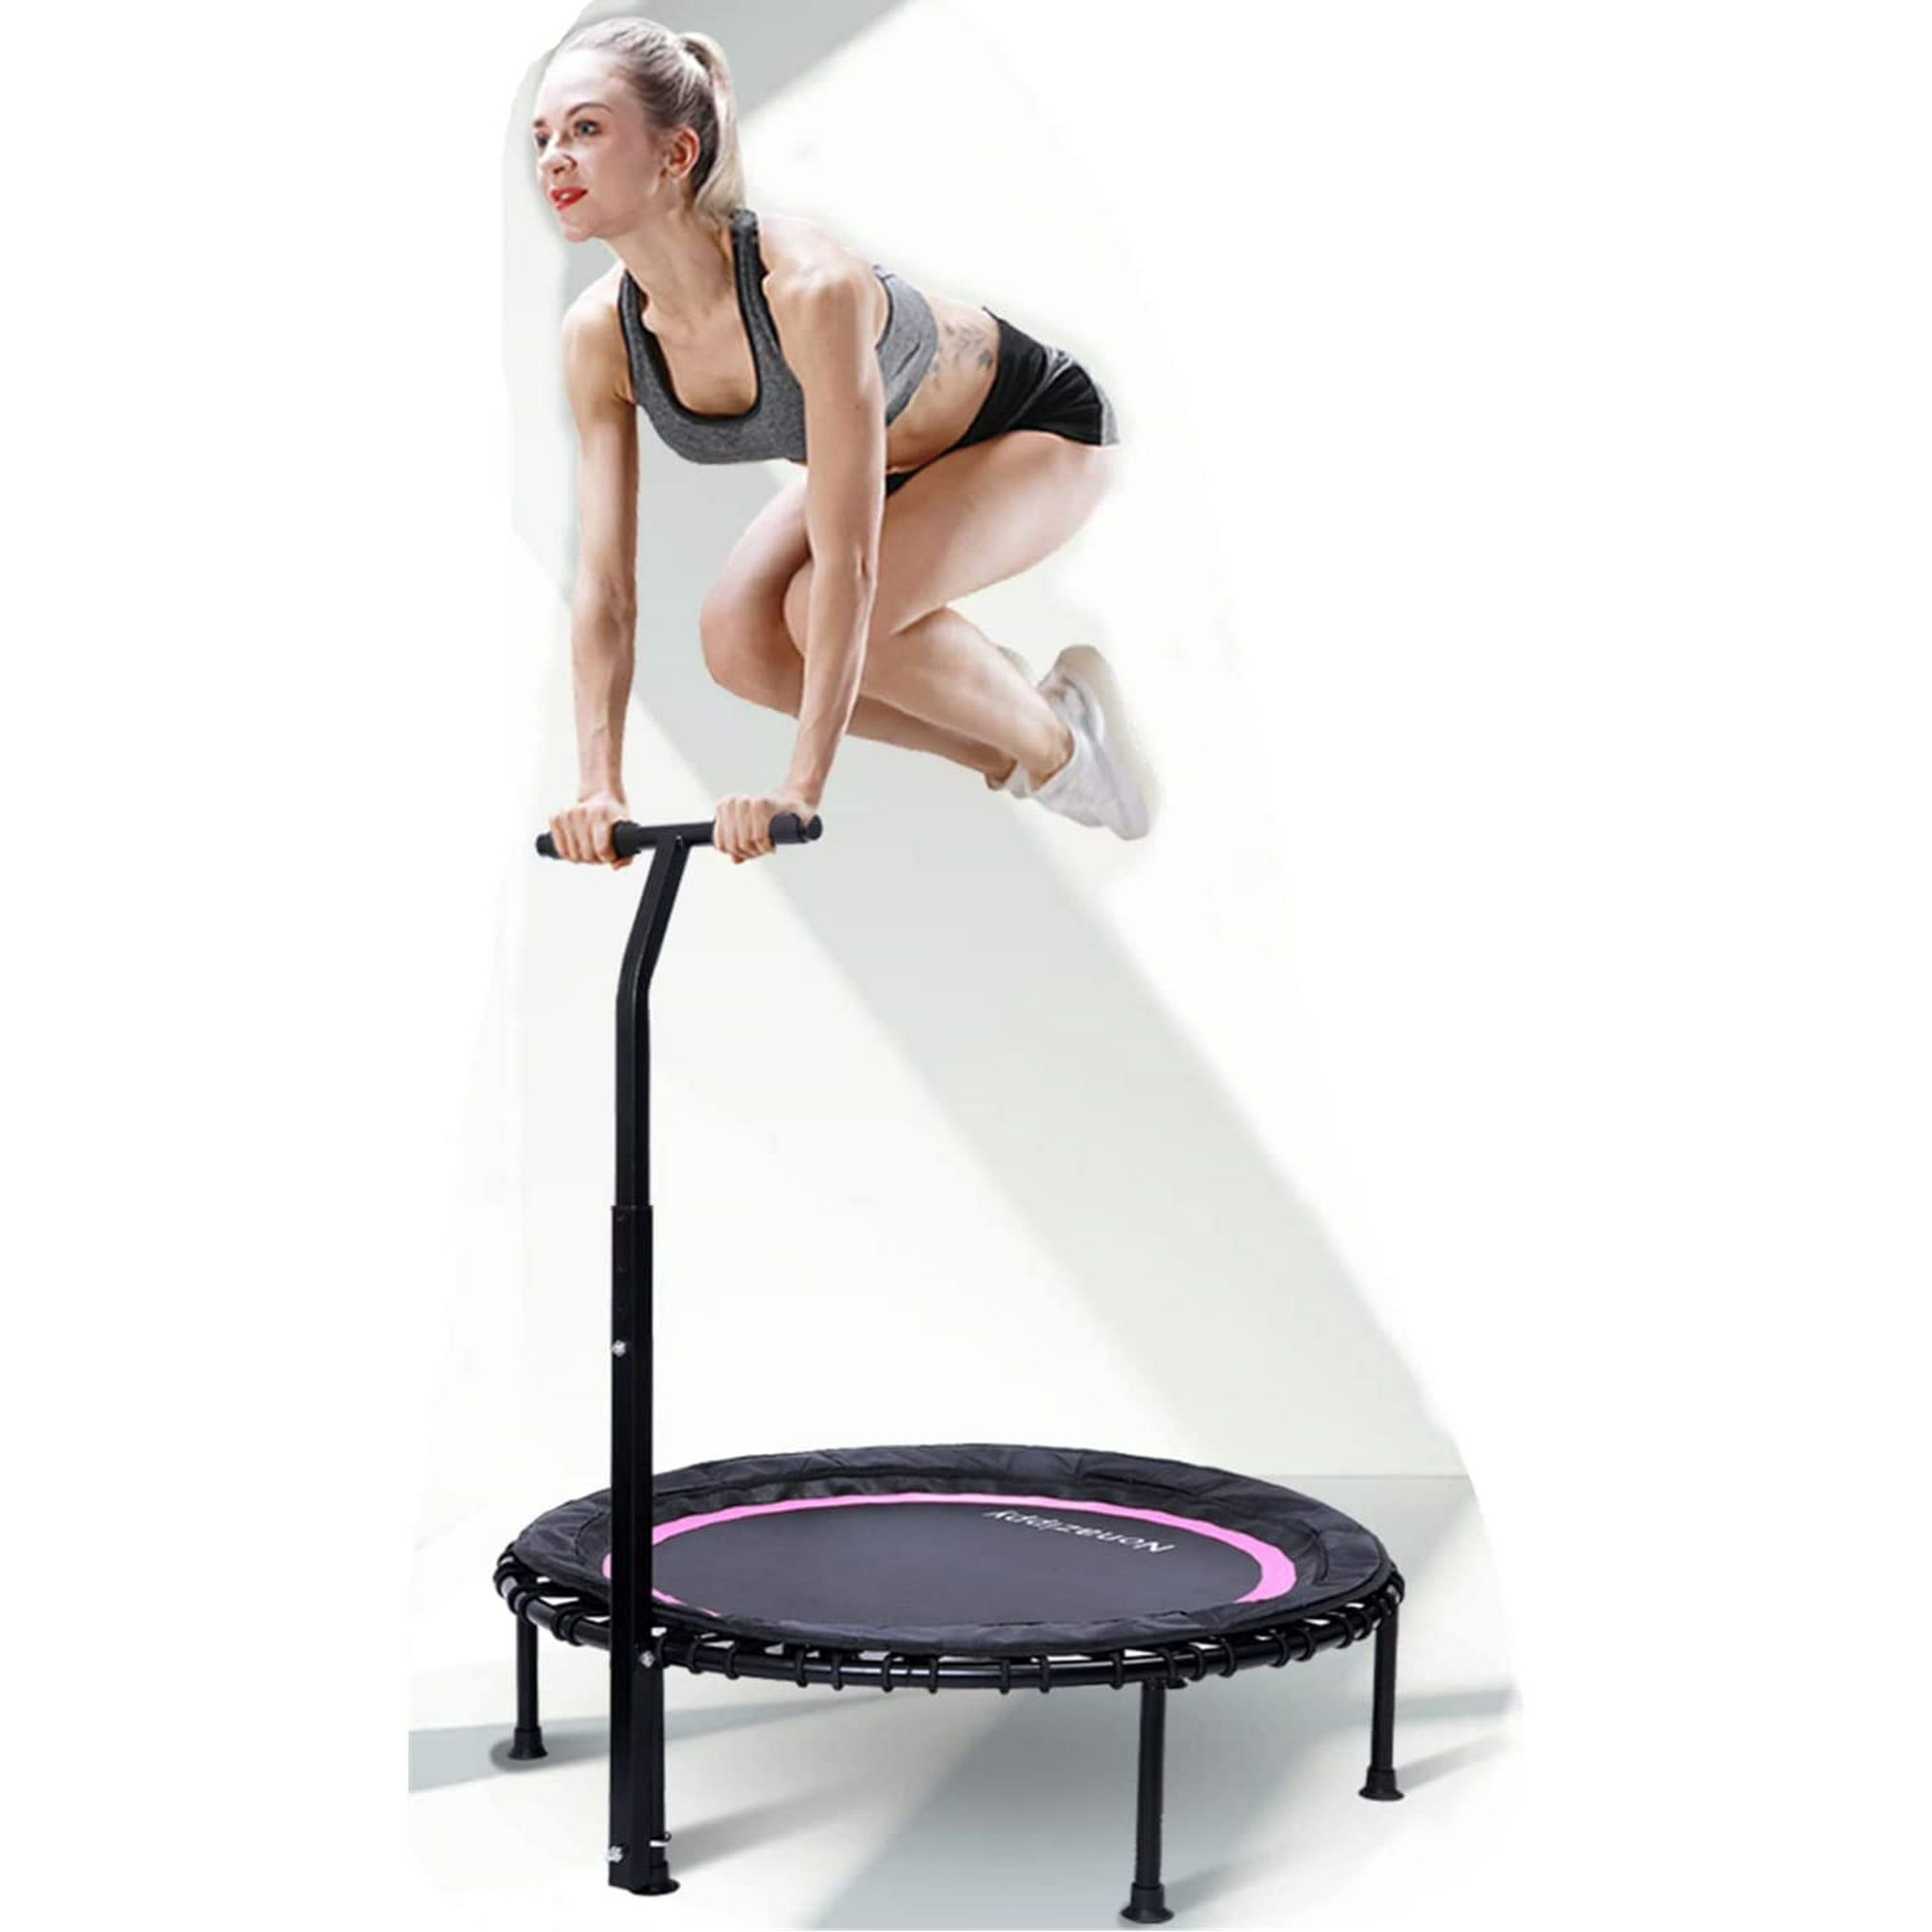 Fitness Trampoline Professional Exercise for Adults, Fitness Goals, Indoor Mini Trampoline for Kids Play, Waterproof,Durable with T-Shaped Handrail(400lbs Weight Capacity) | Walmart Canada